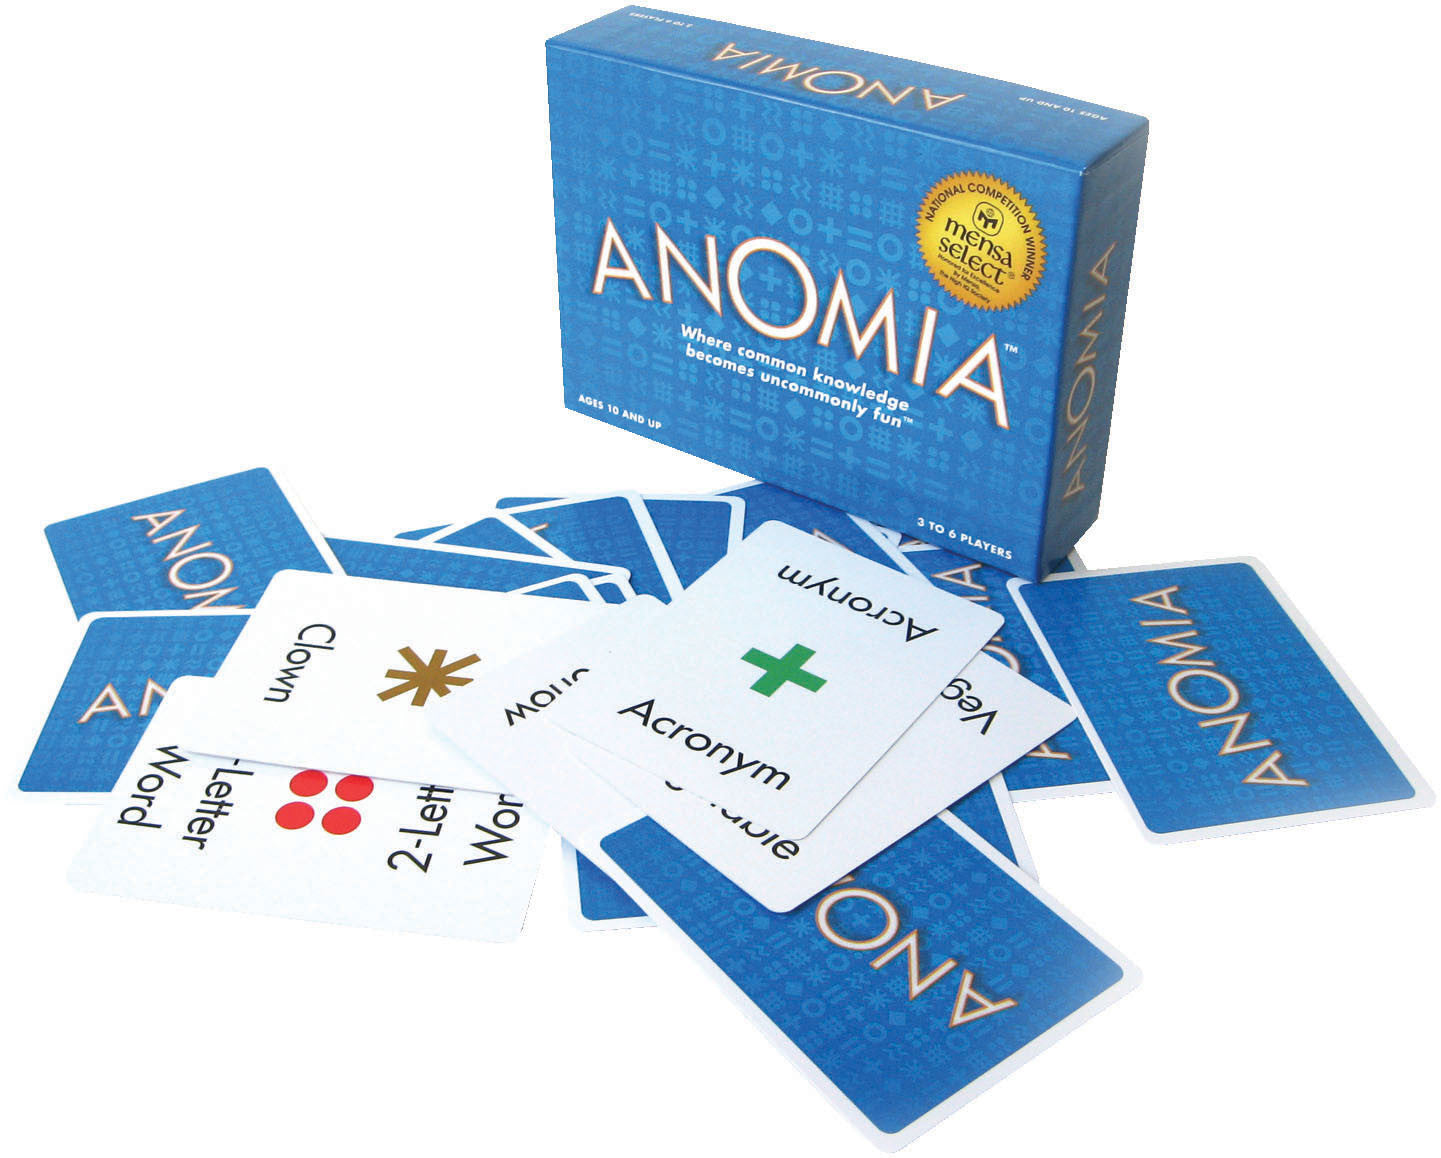 ANOMIA Card Game